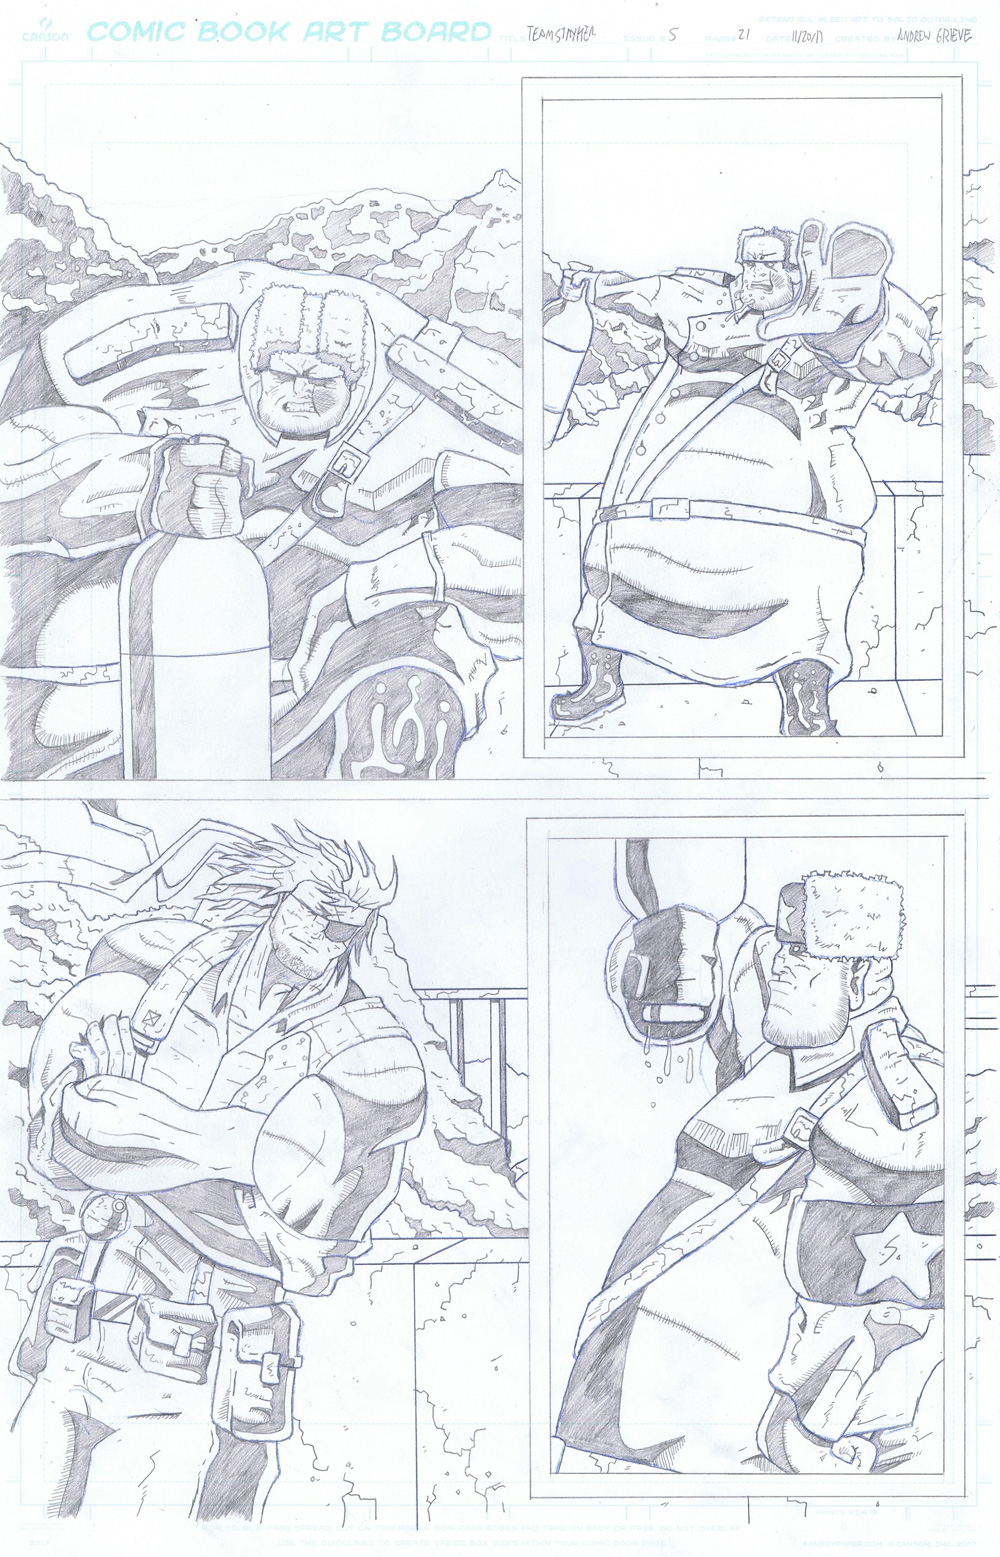 MISSION 005: PAGE 21 PENCIL